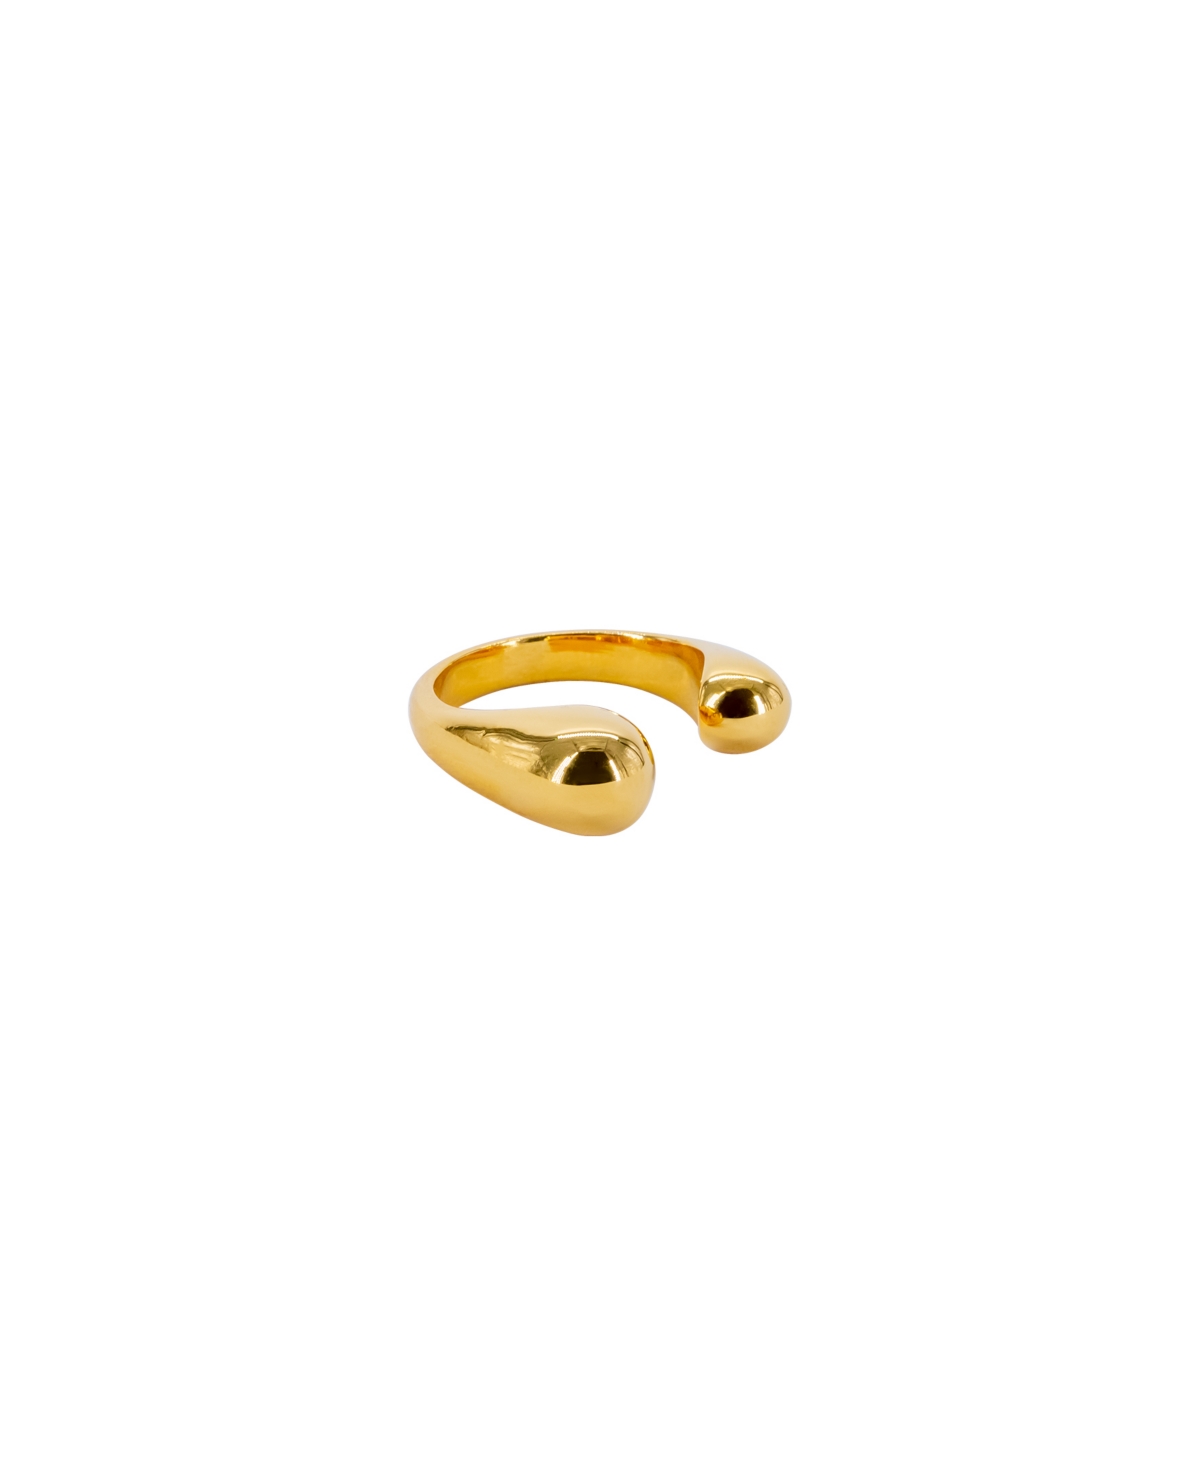 Nabi Ring in 18K Gold- Plated Brass, Adjustable Sizeing - Gold